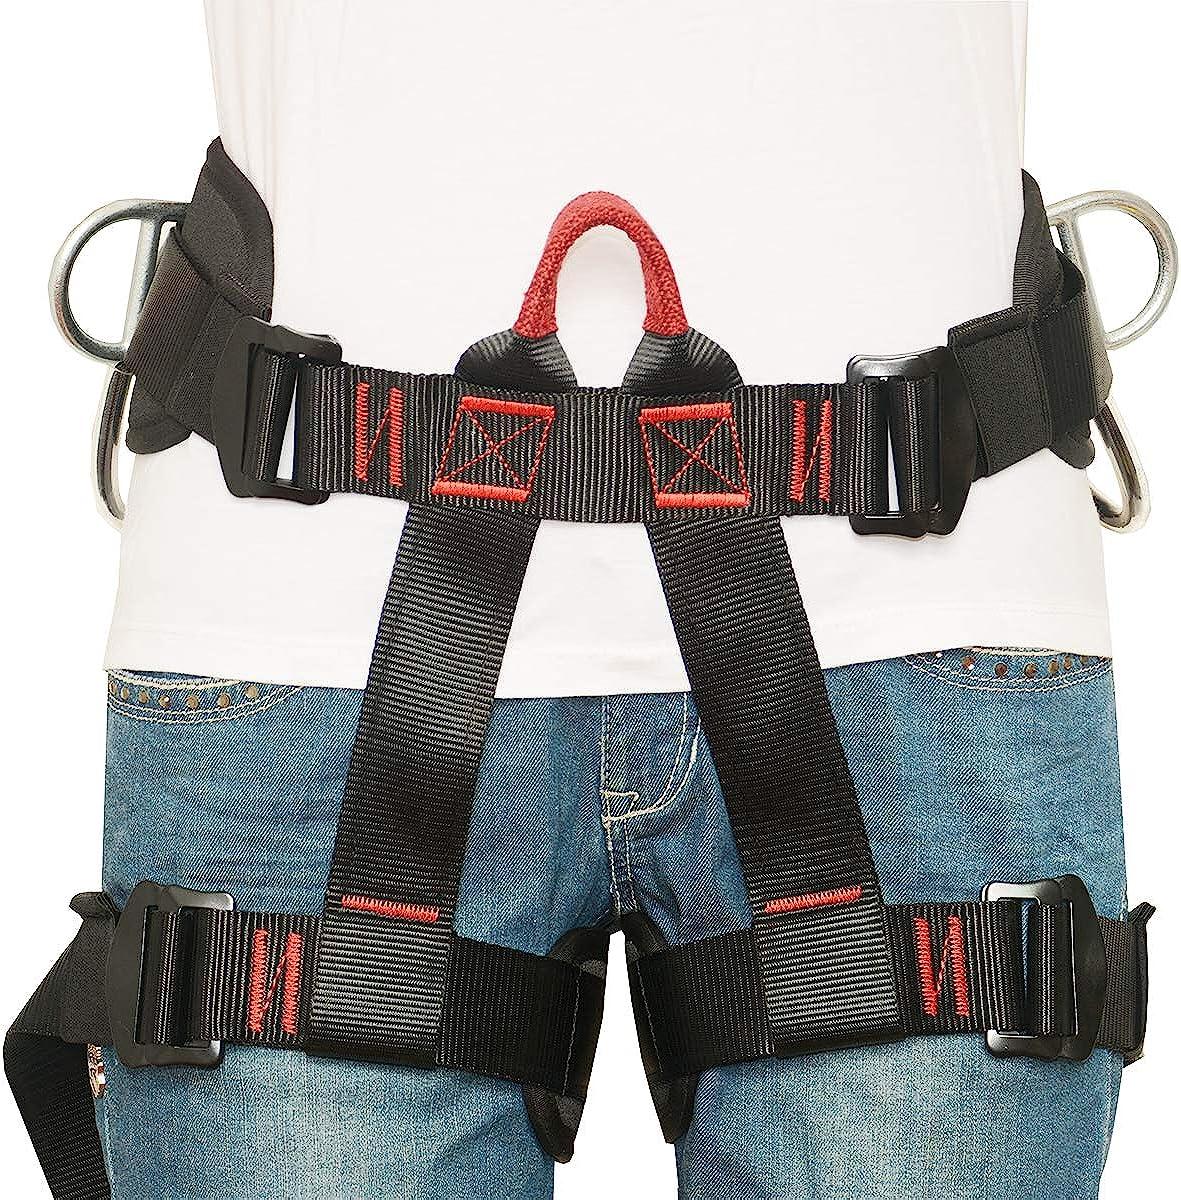 HeeJo Climbing, Safety Safe Seat Belt for Outdoor Tree Climbing, Outward  Band Expanding Training Large Size,Climbing Gear